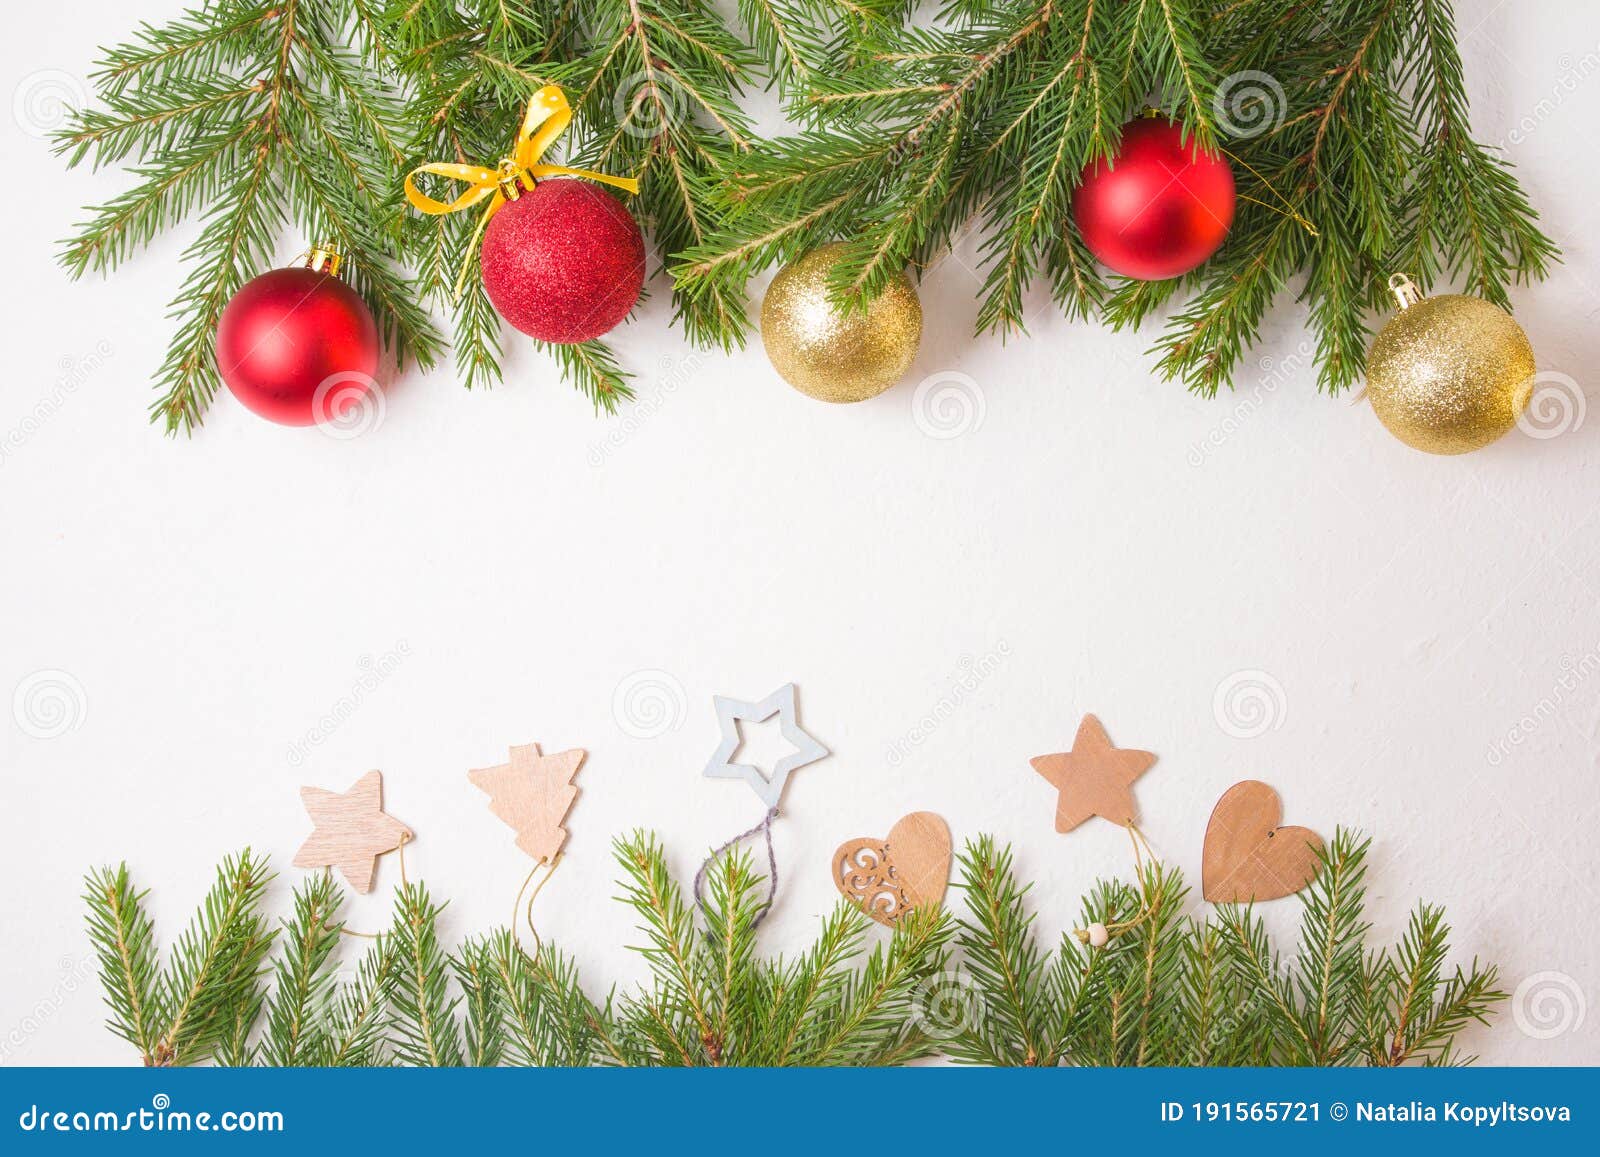 frame from christmas toys and natrual fir branches on a white background